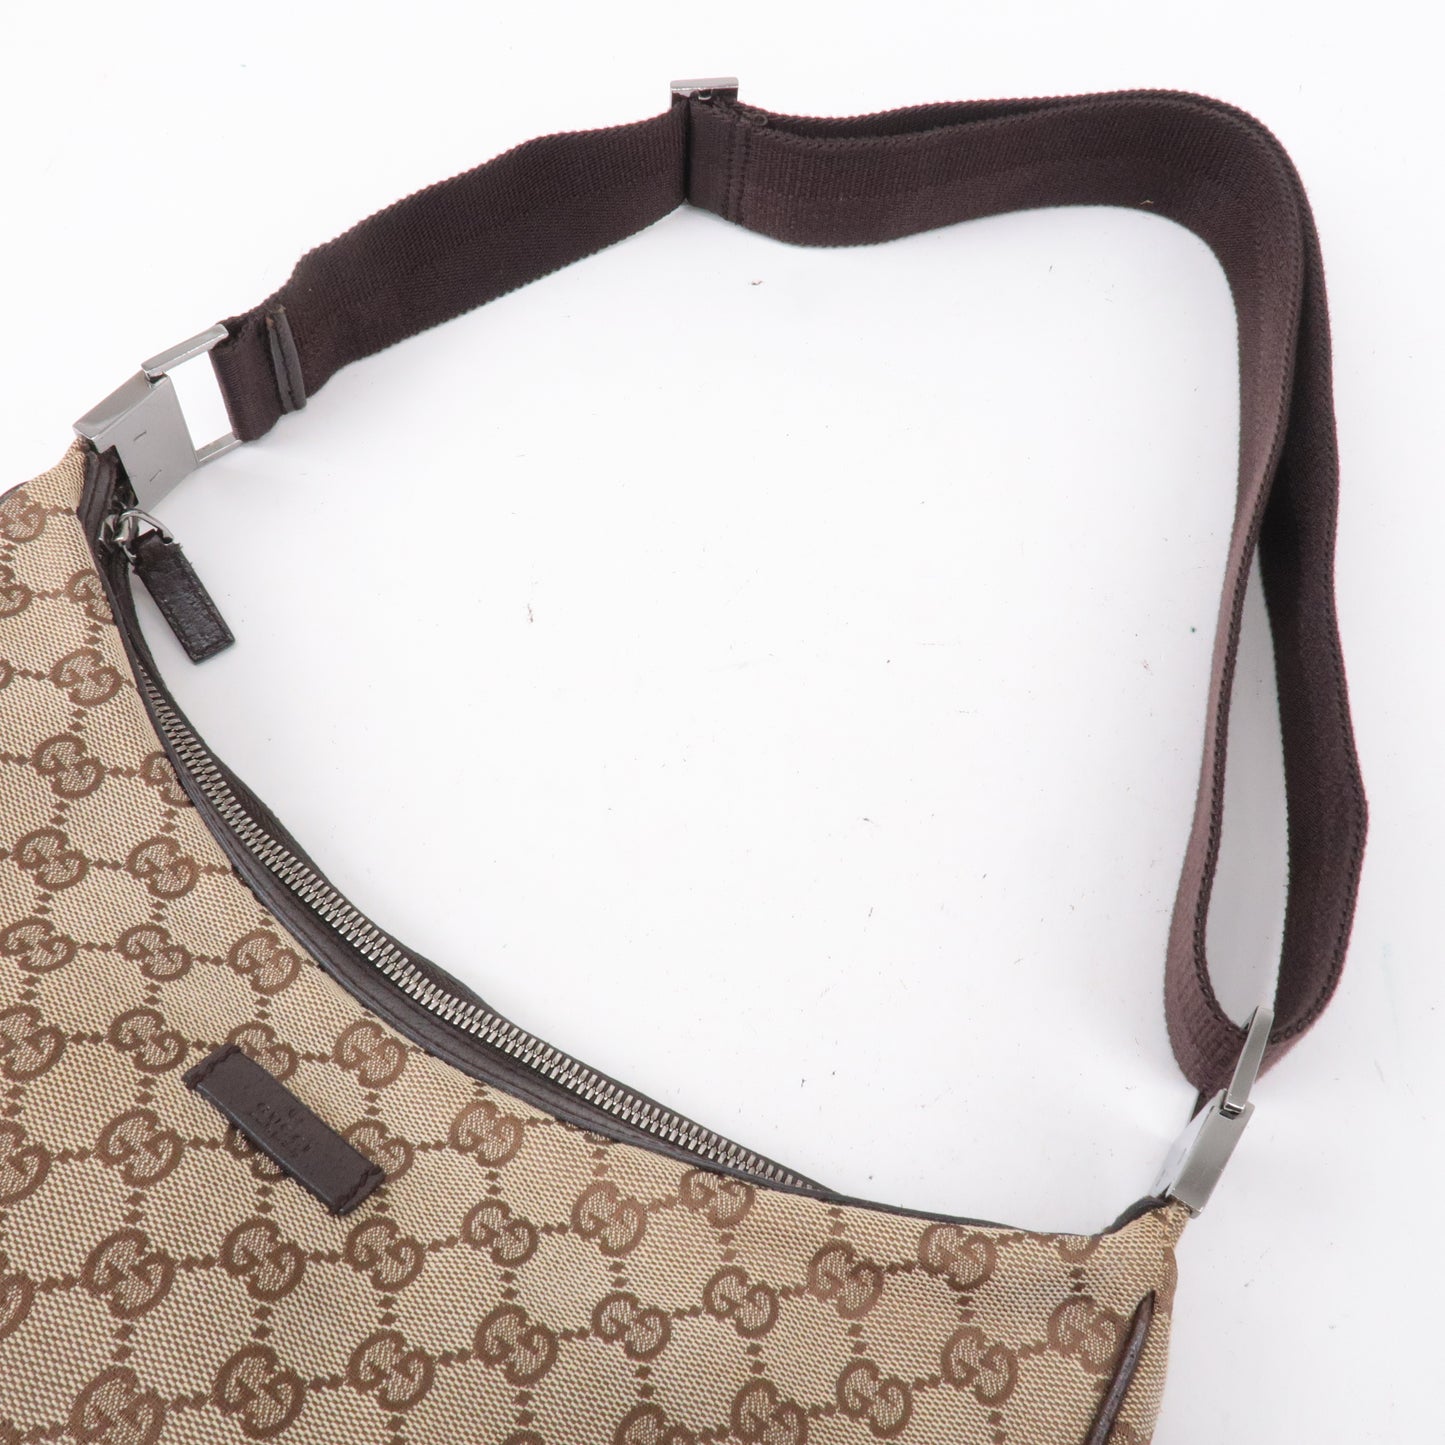 GUCCI GG Canvas Leather Shoulder Bag Cross Body Beige Brown 122790